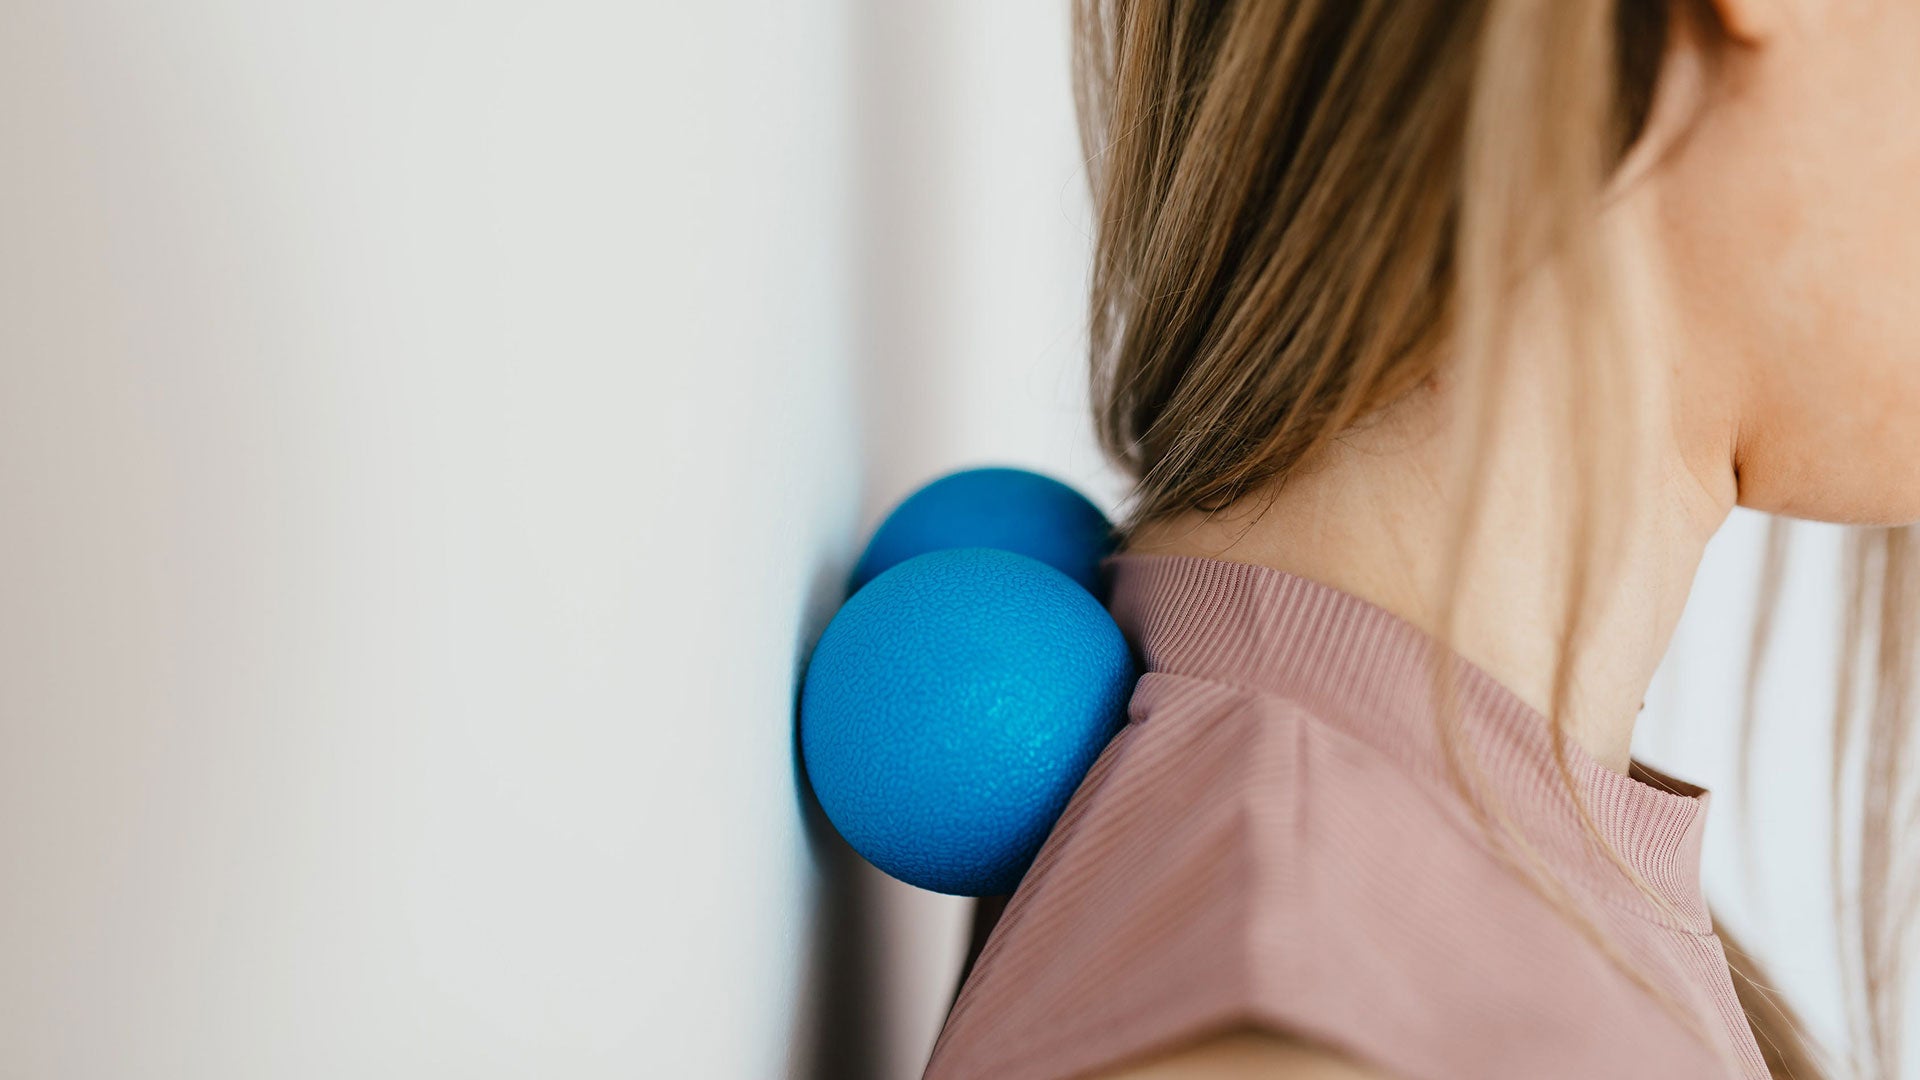 How to relieve tension in the neck and shoulders?